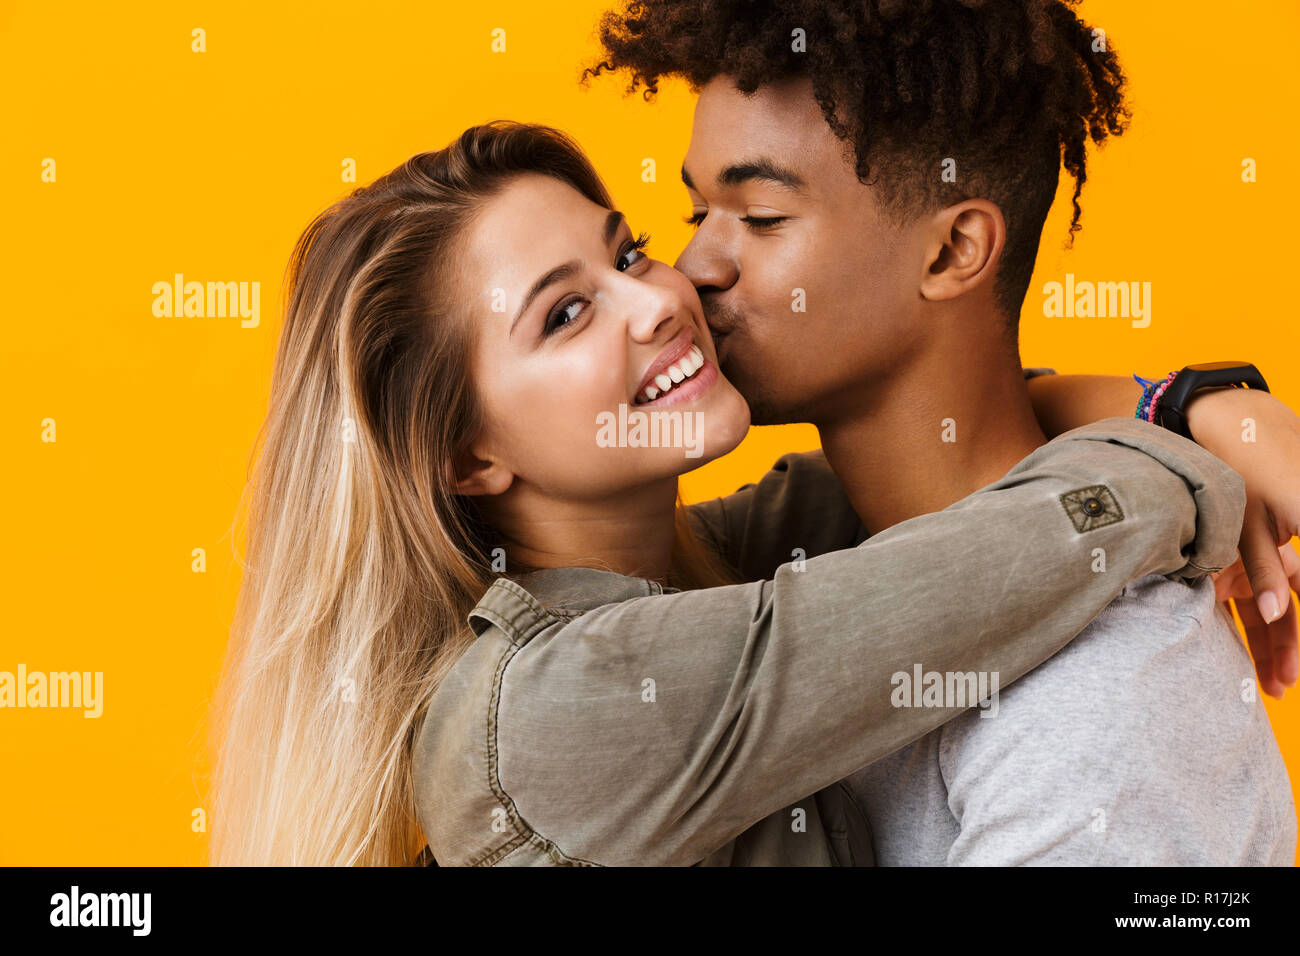 Super Cute Poses for Couples Photos to Show Your Love ...